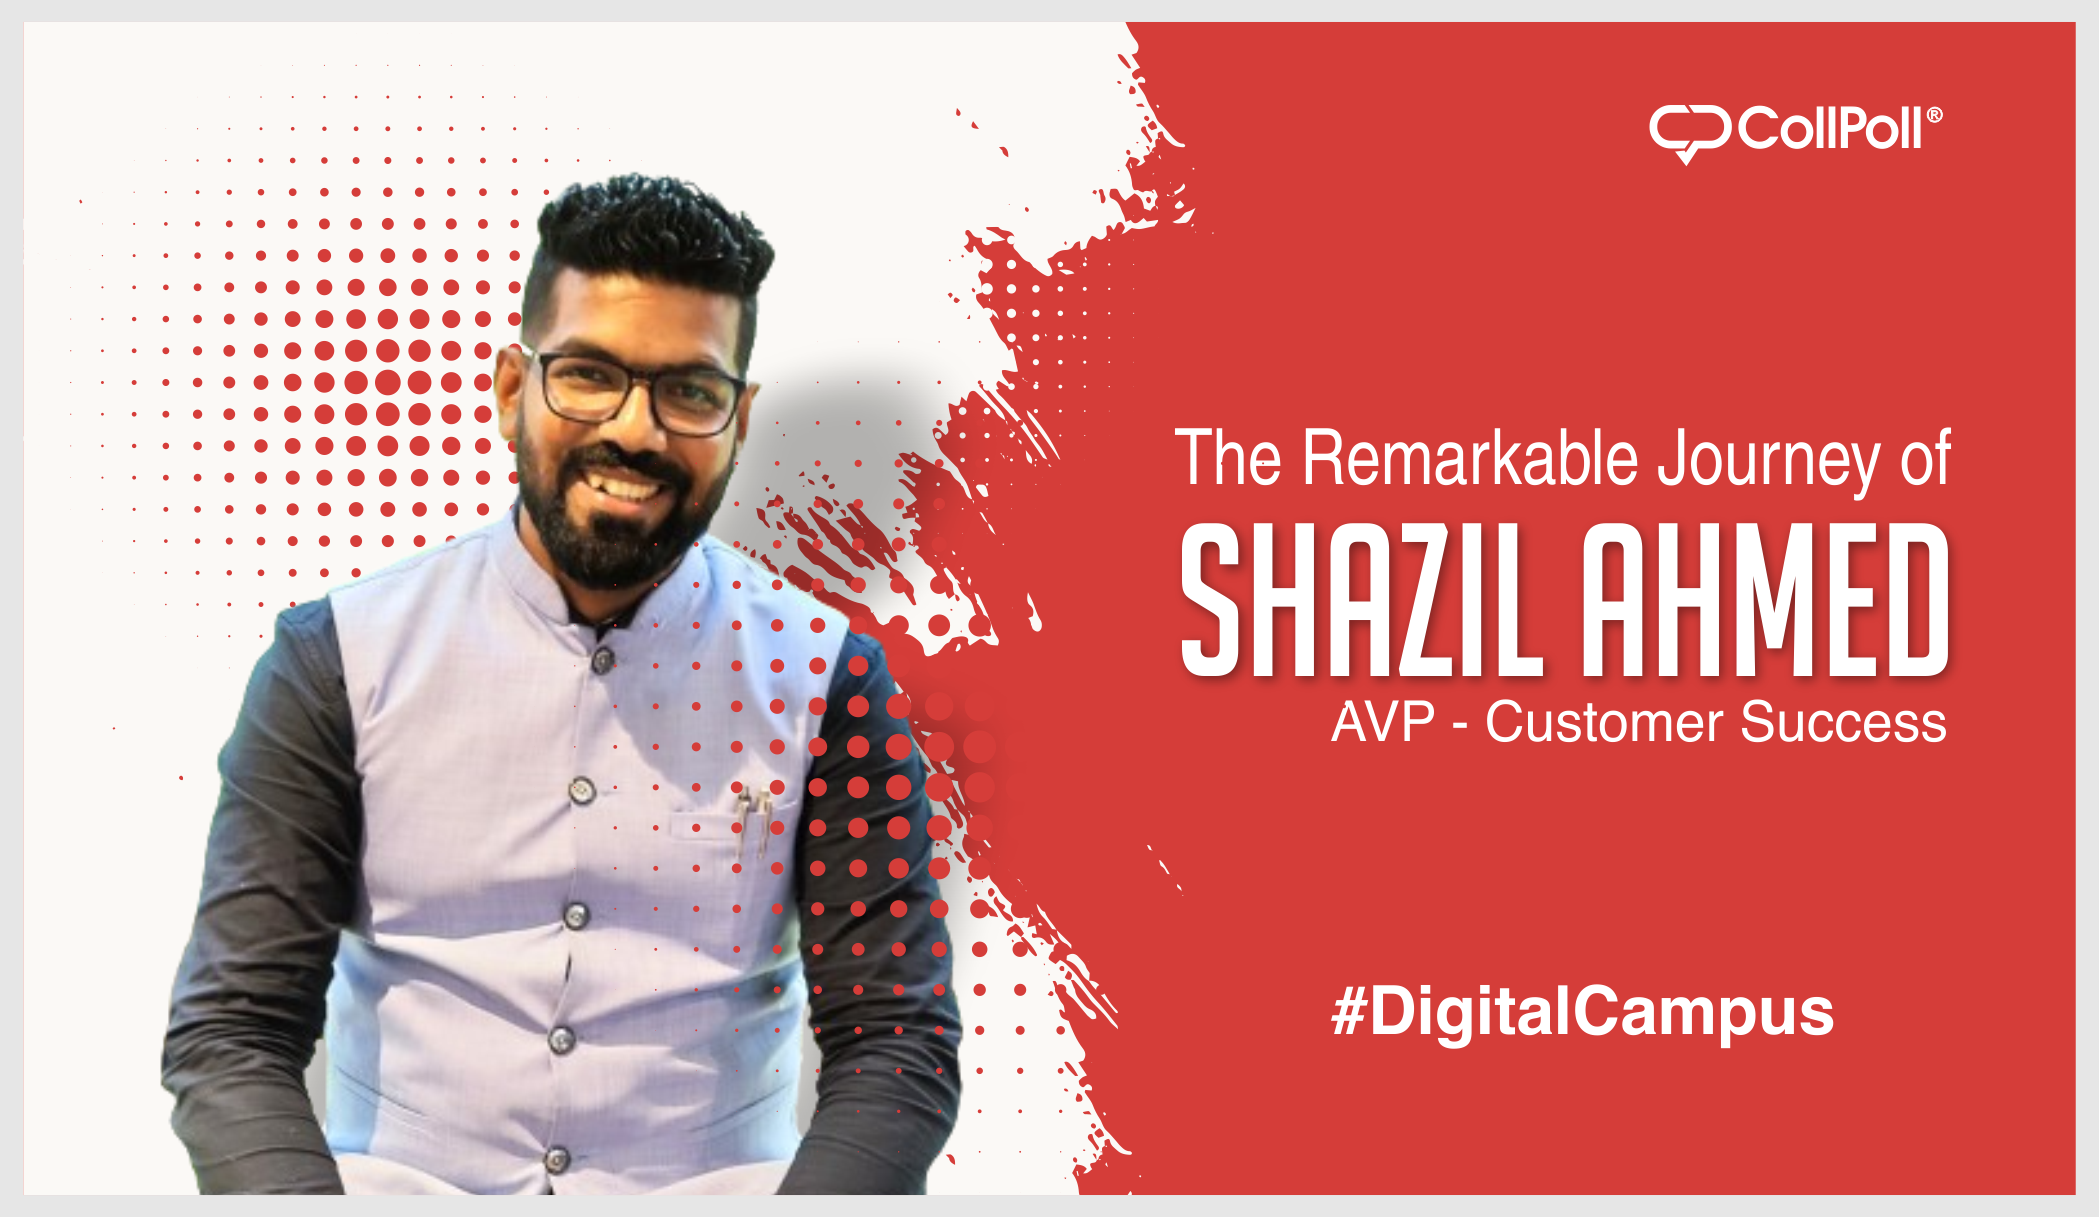 The Remarkable Journey of Shazil Ahmed, AVP for Customer Success at CollPoll